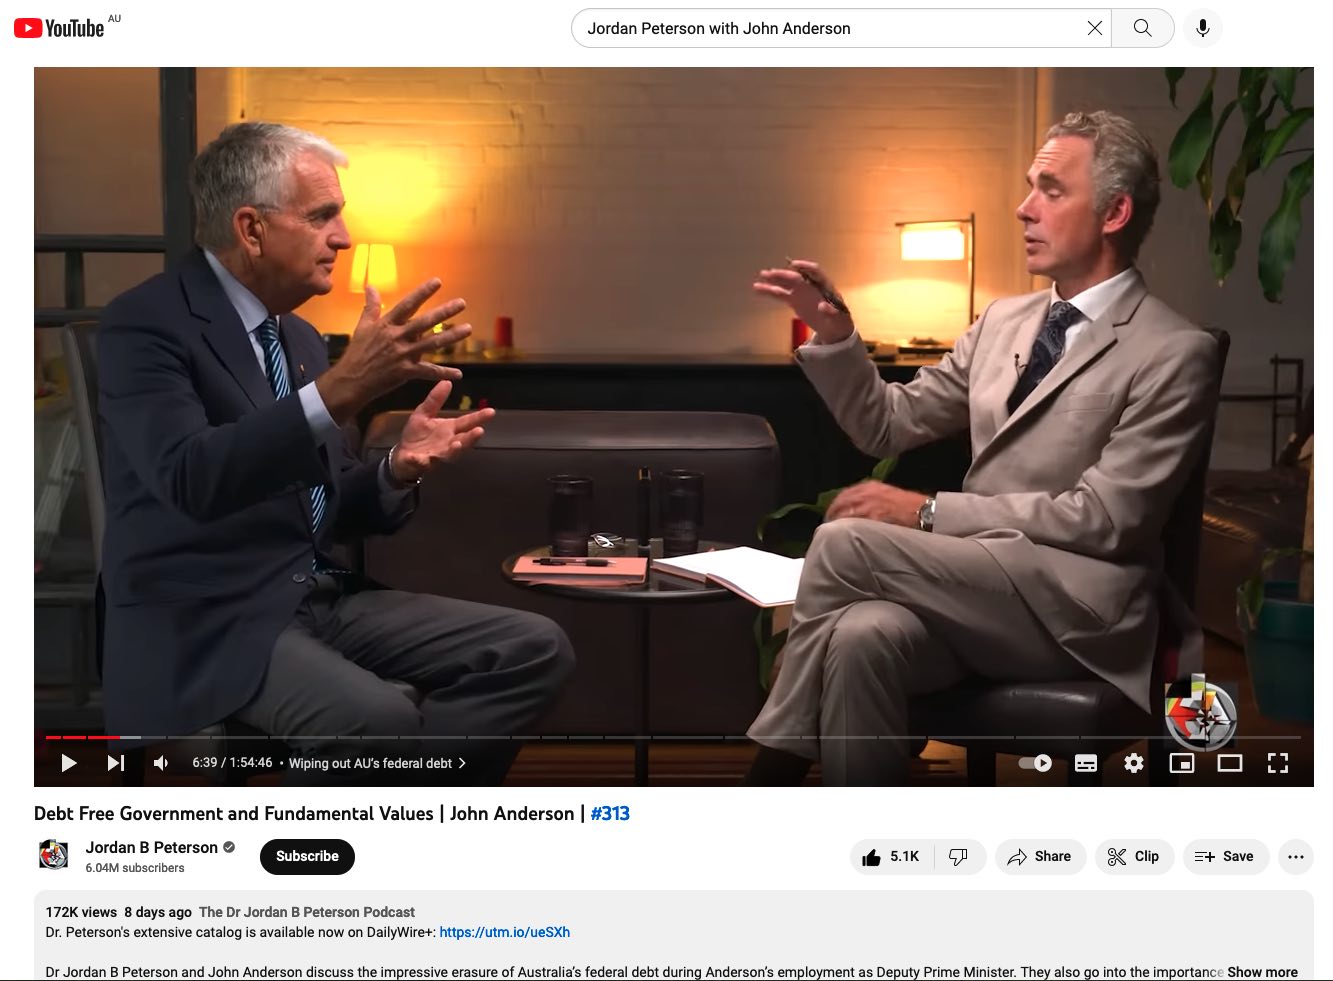 Dr. Jordan Peterson interviewing Mr. John Anderson on his Youtube channel